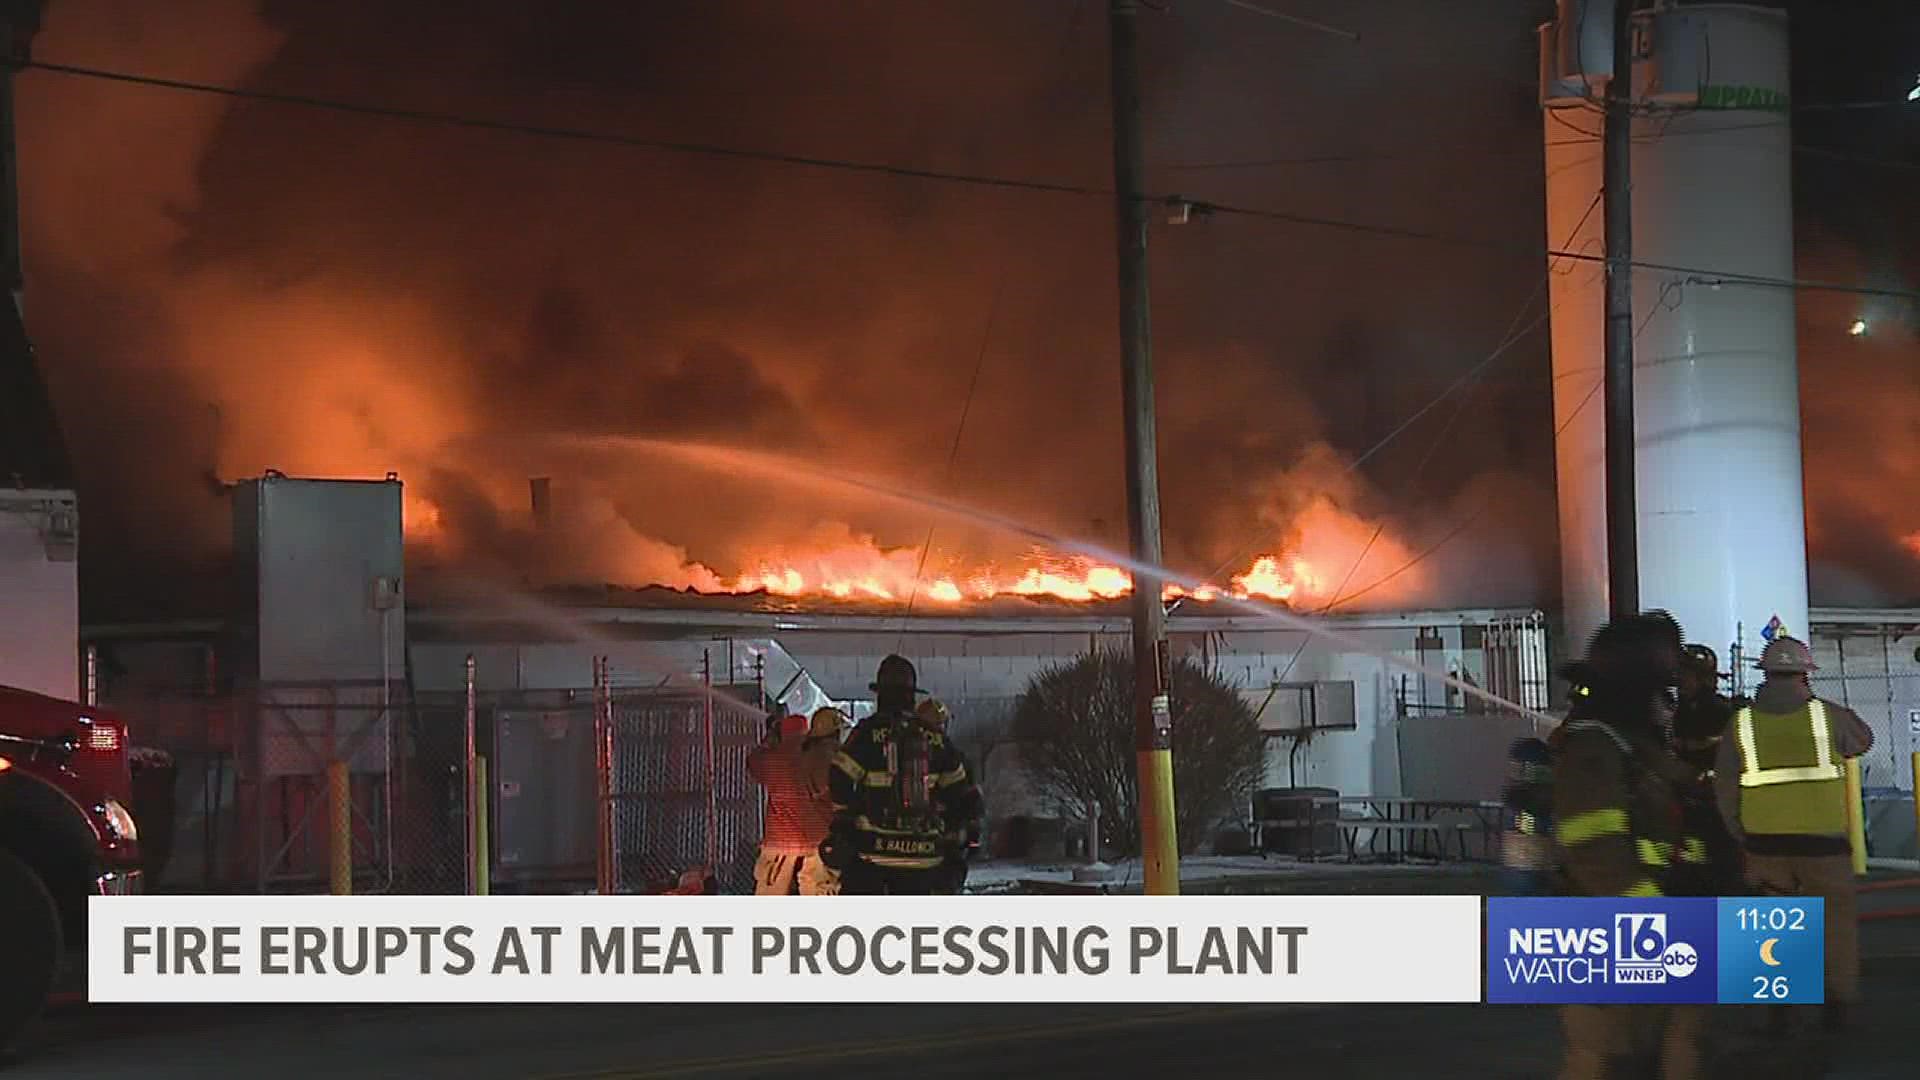 The fire broke out around 5:30 p.m. at the Maid-Rite Steak Company meat processing plant.